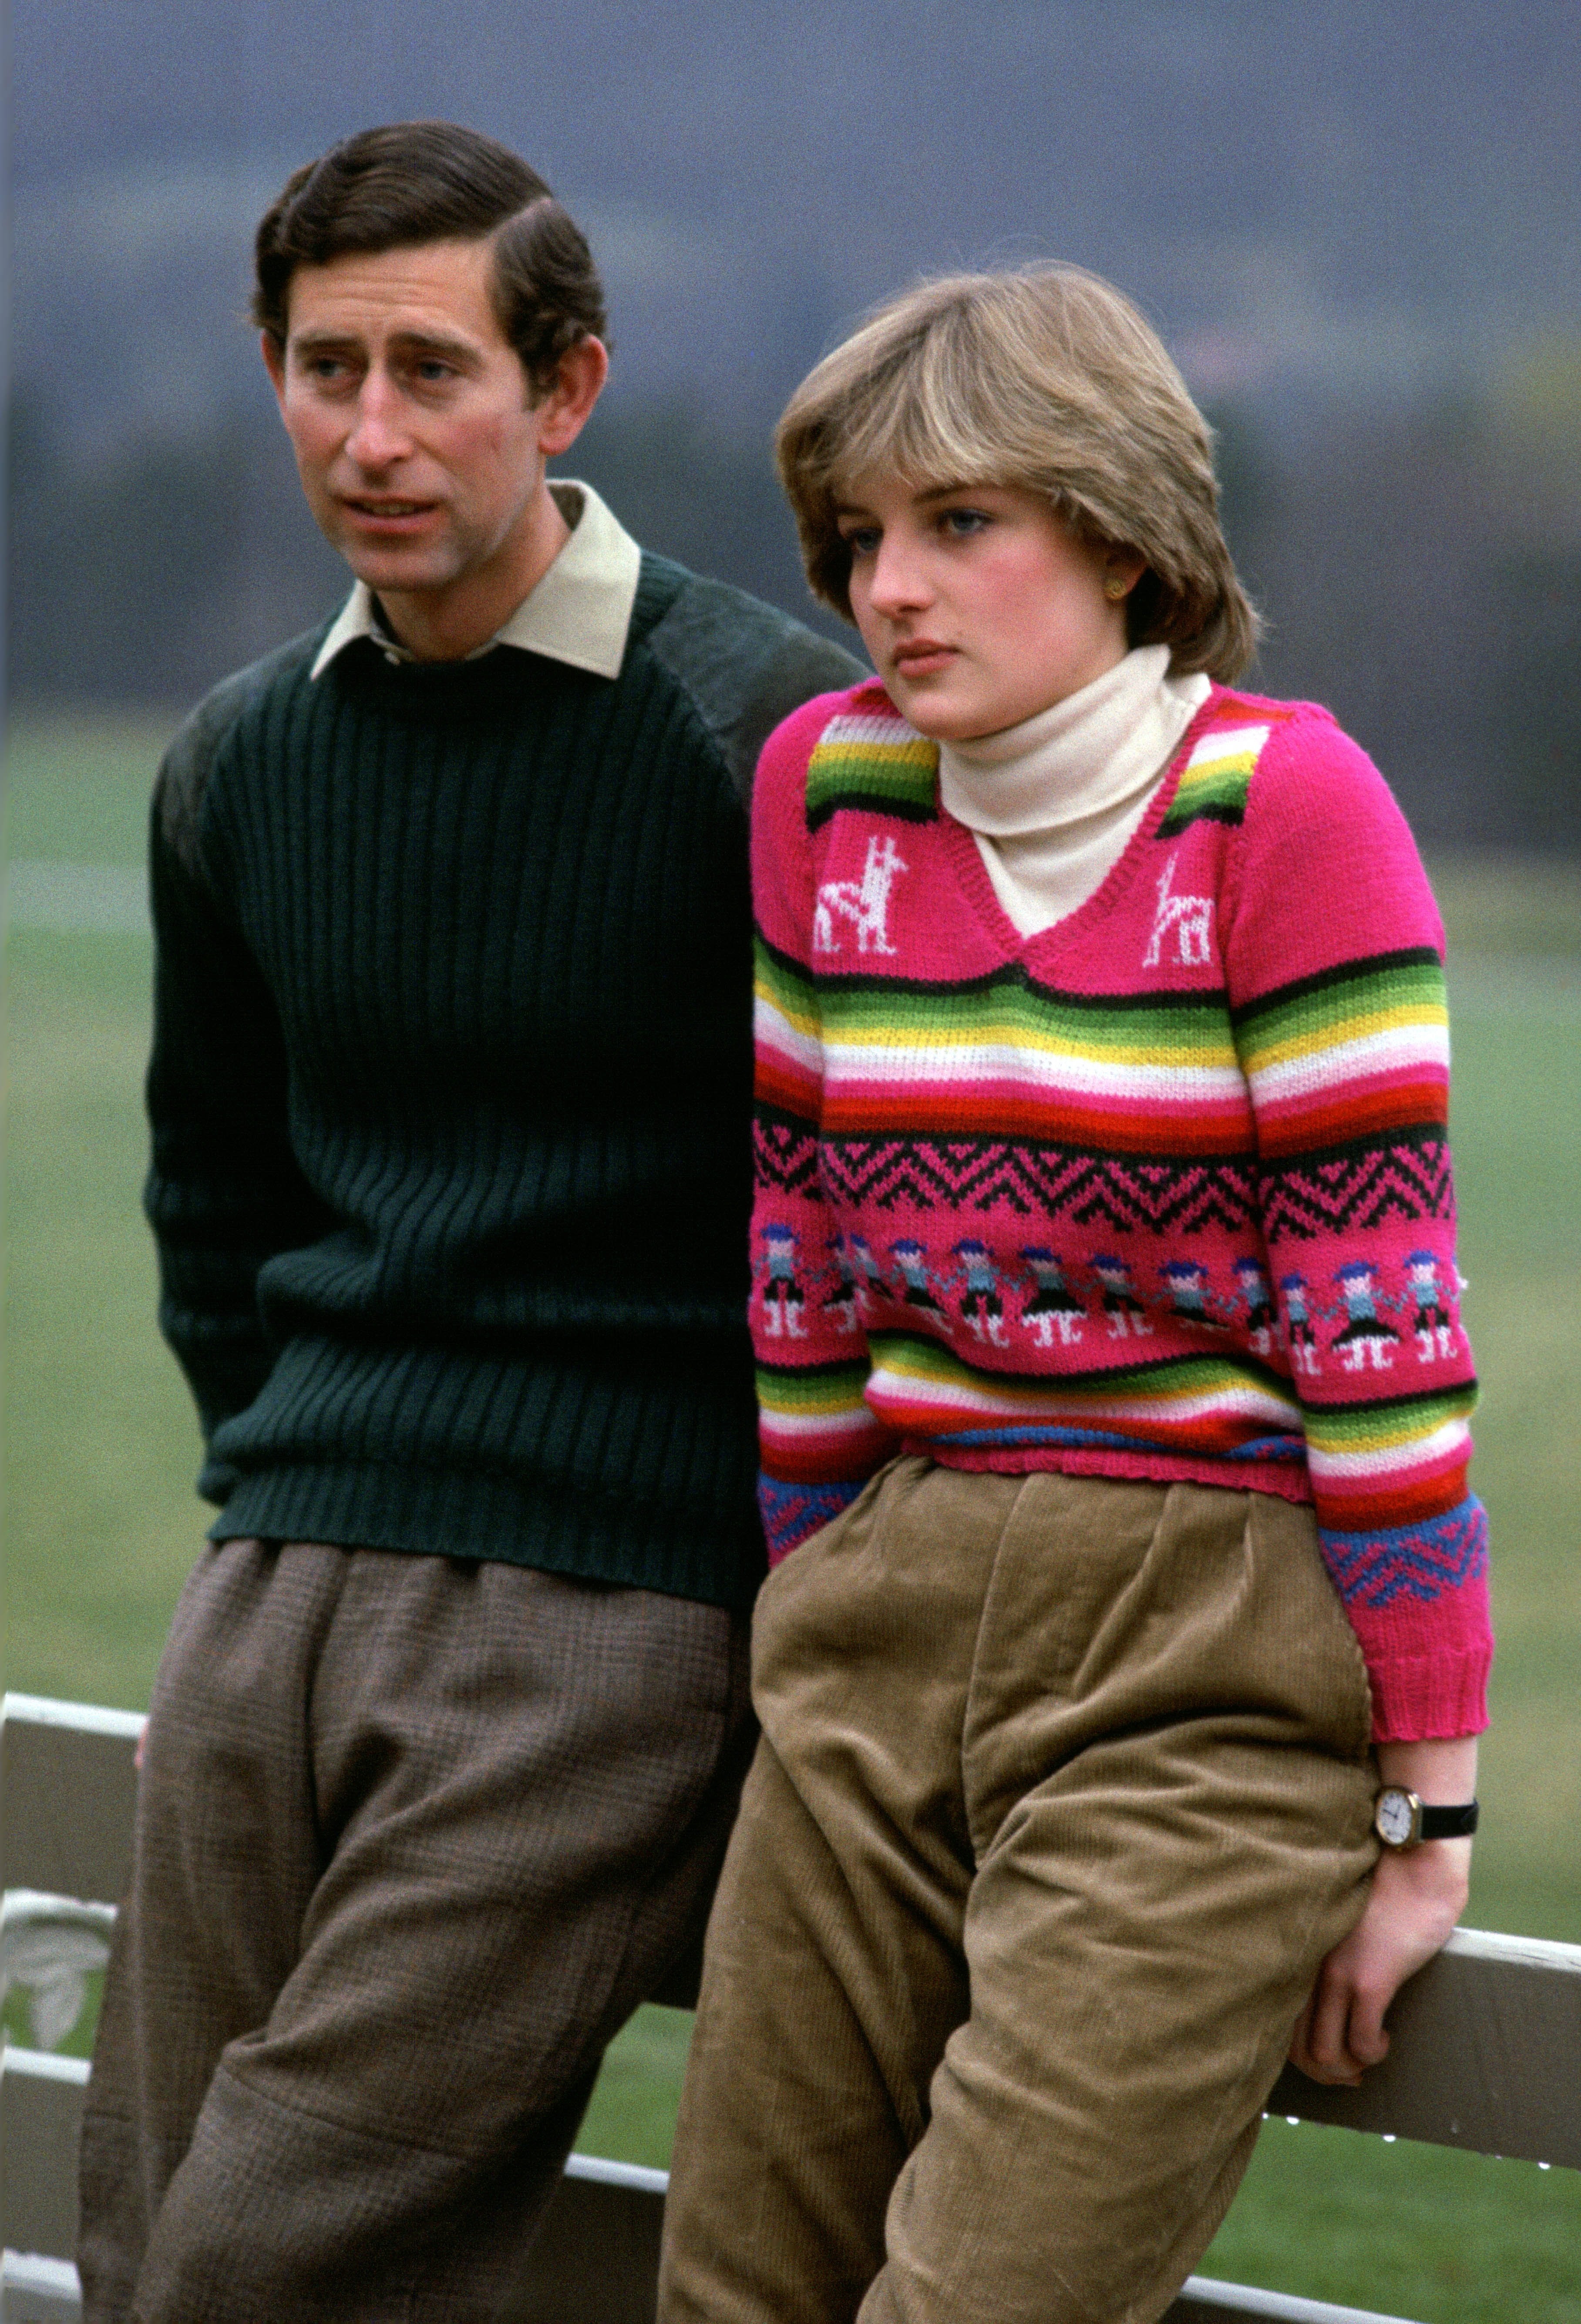 UNITED KINGDOM - MAY 06:  Prince Charles, Prince of Wales with his fiance Lady Diana Spencer during a photocall before their wedding while staying at Craigowan Lodge on the Balmoral Estate in Scotland  (Photo by Tim Graham Photo Library via Getty Images) (Foto: Tim Graham Photo Library via Get)